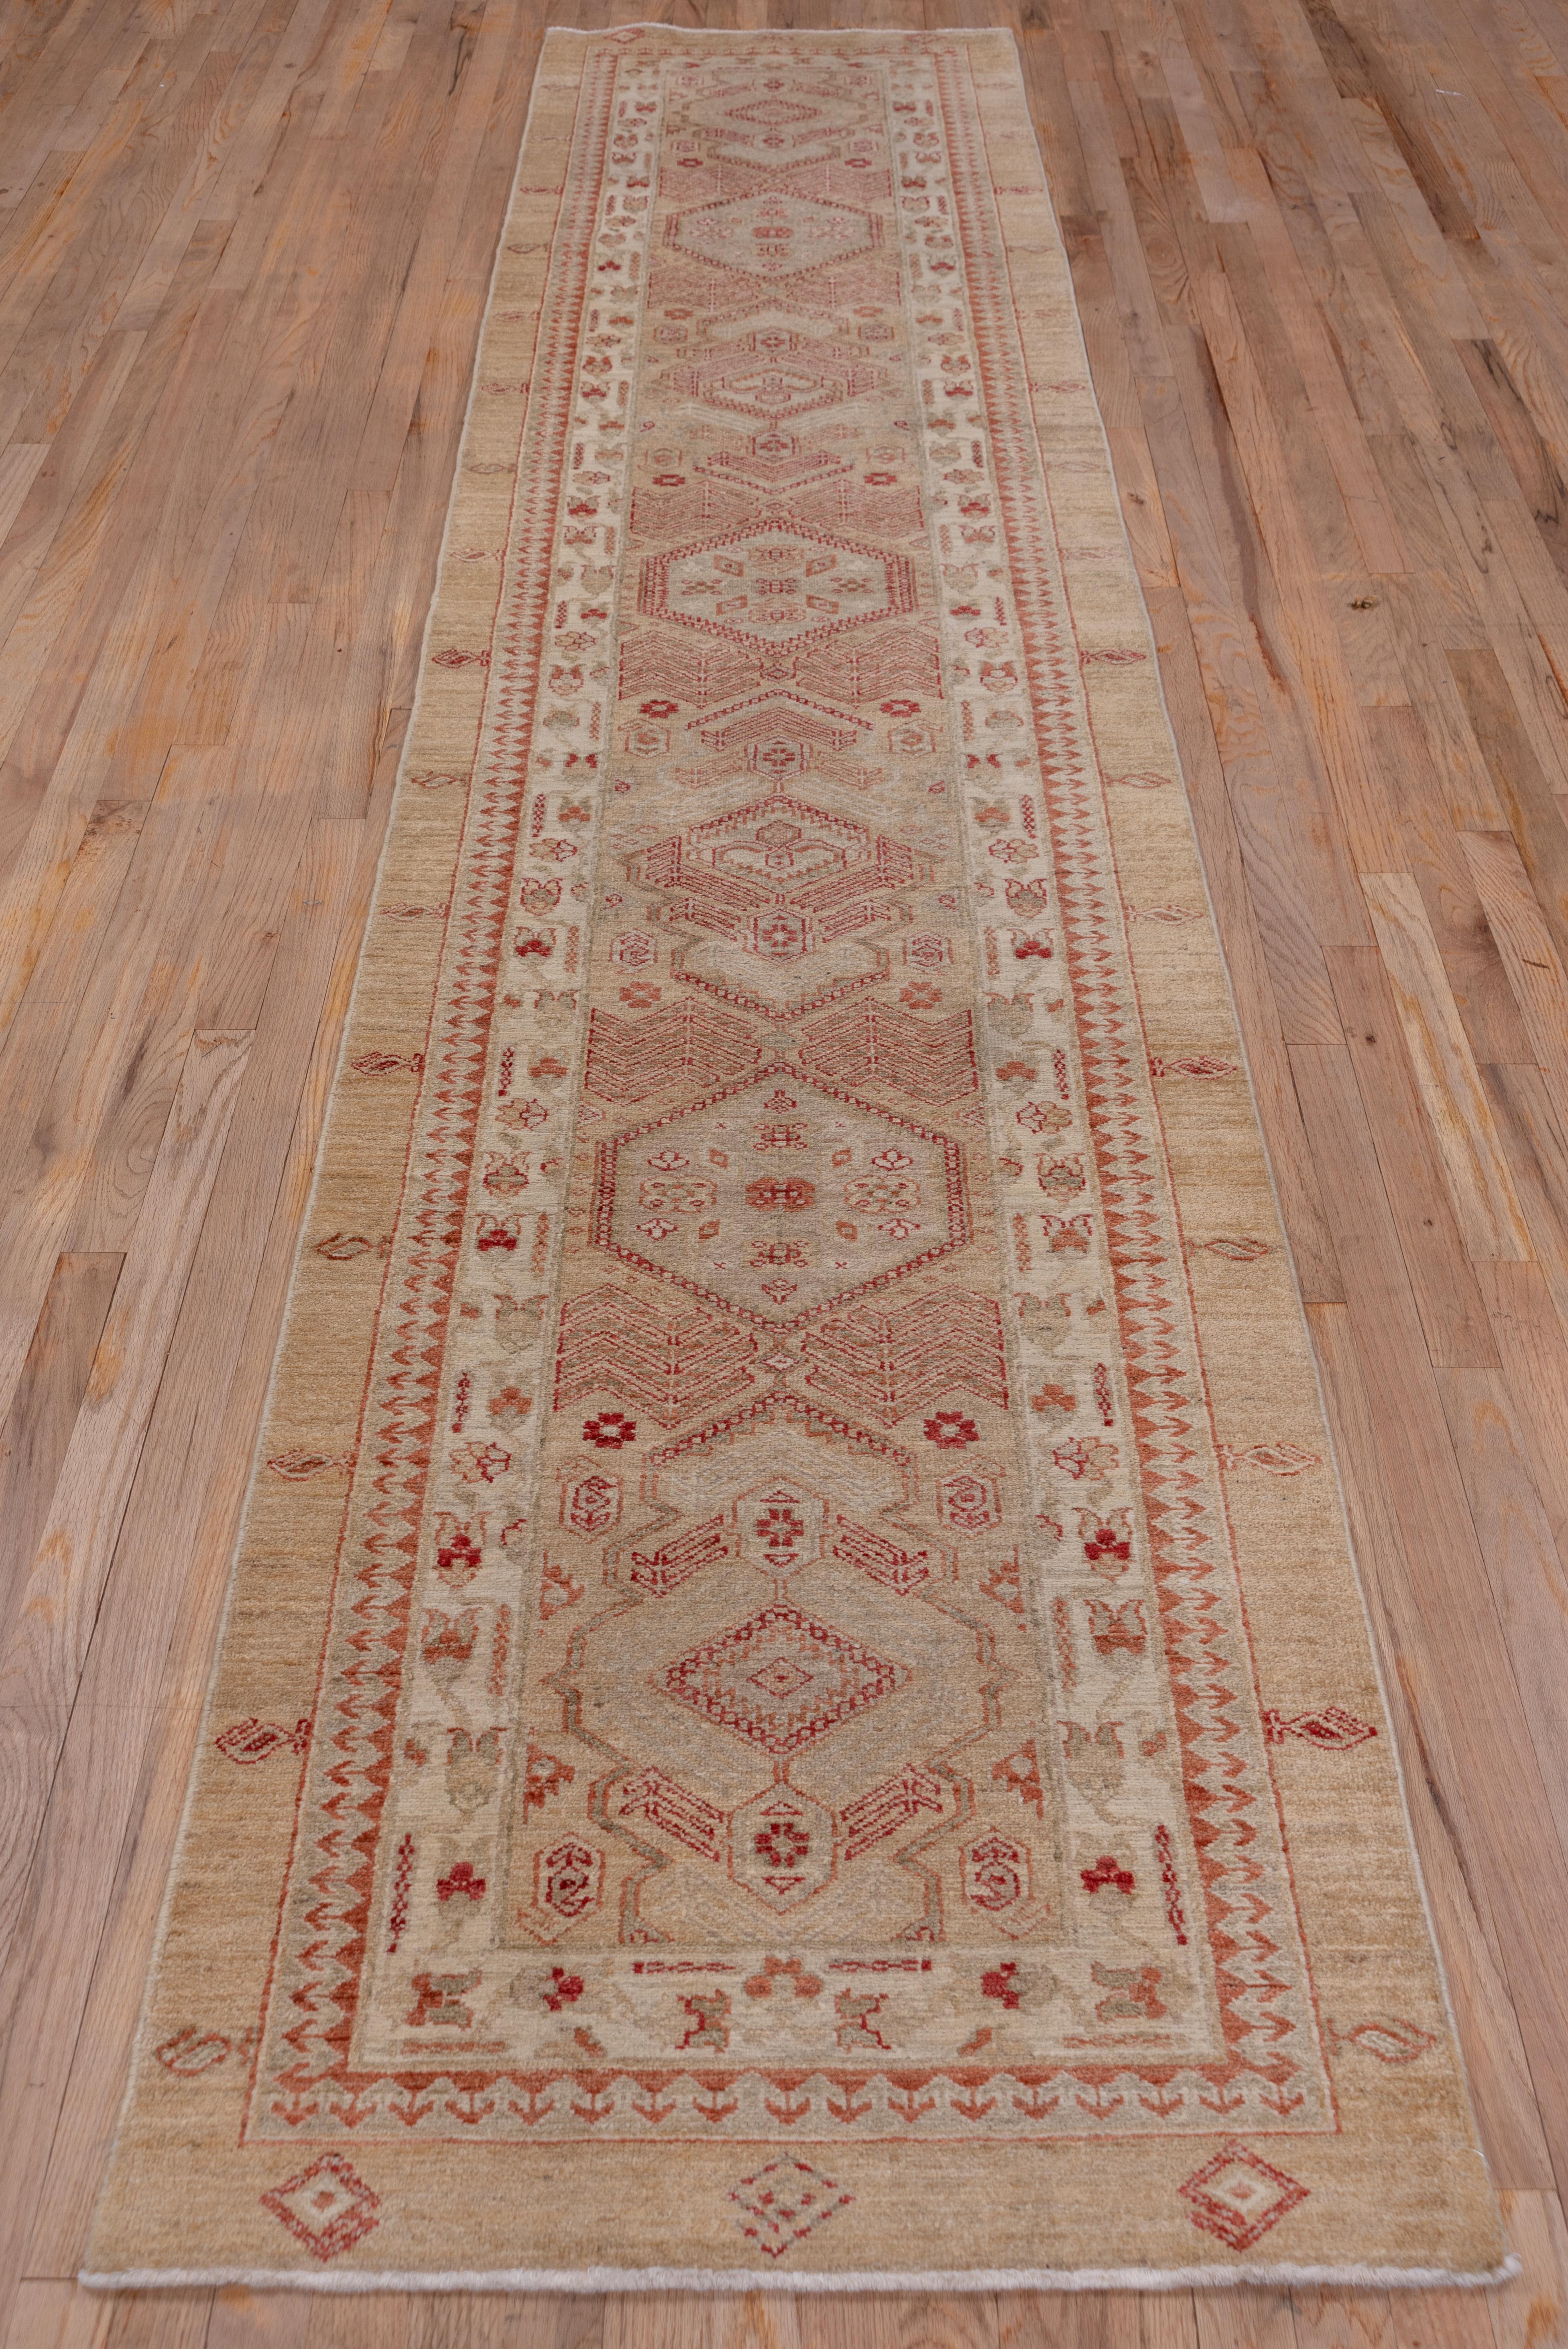 This lightly toned recent NW Persian Sarab runner displays alternating hexagons and cartouches along the central axis of the beige-camel field. Herringbone plants adorn the field sides along with small bottehs. The outer border shows sporadic botehs